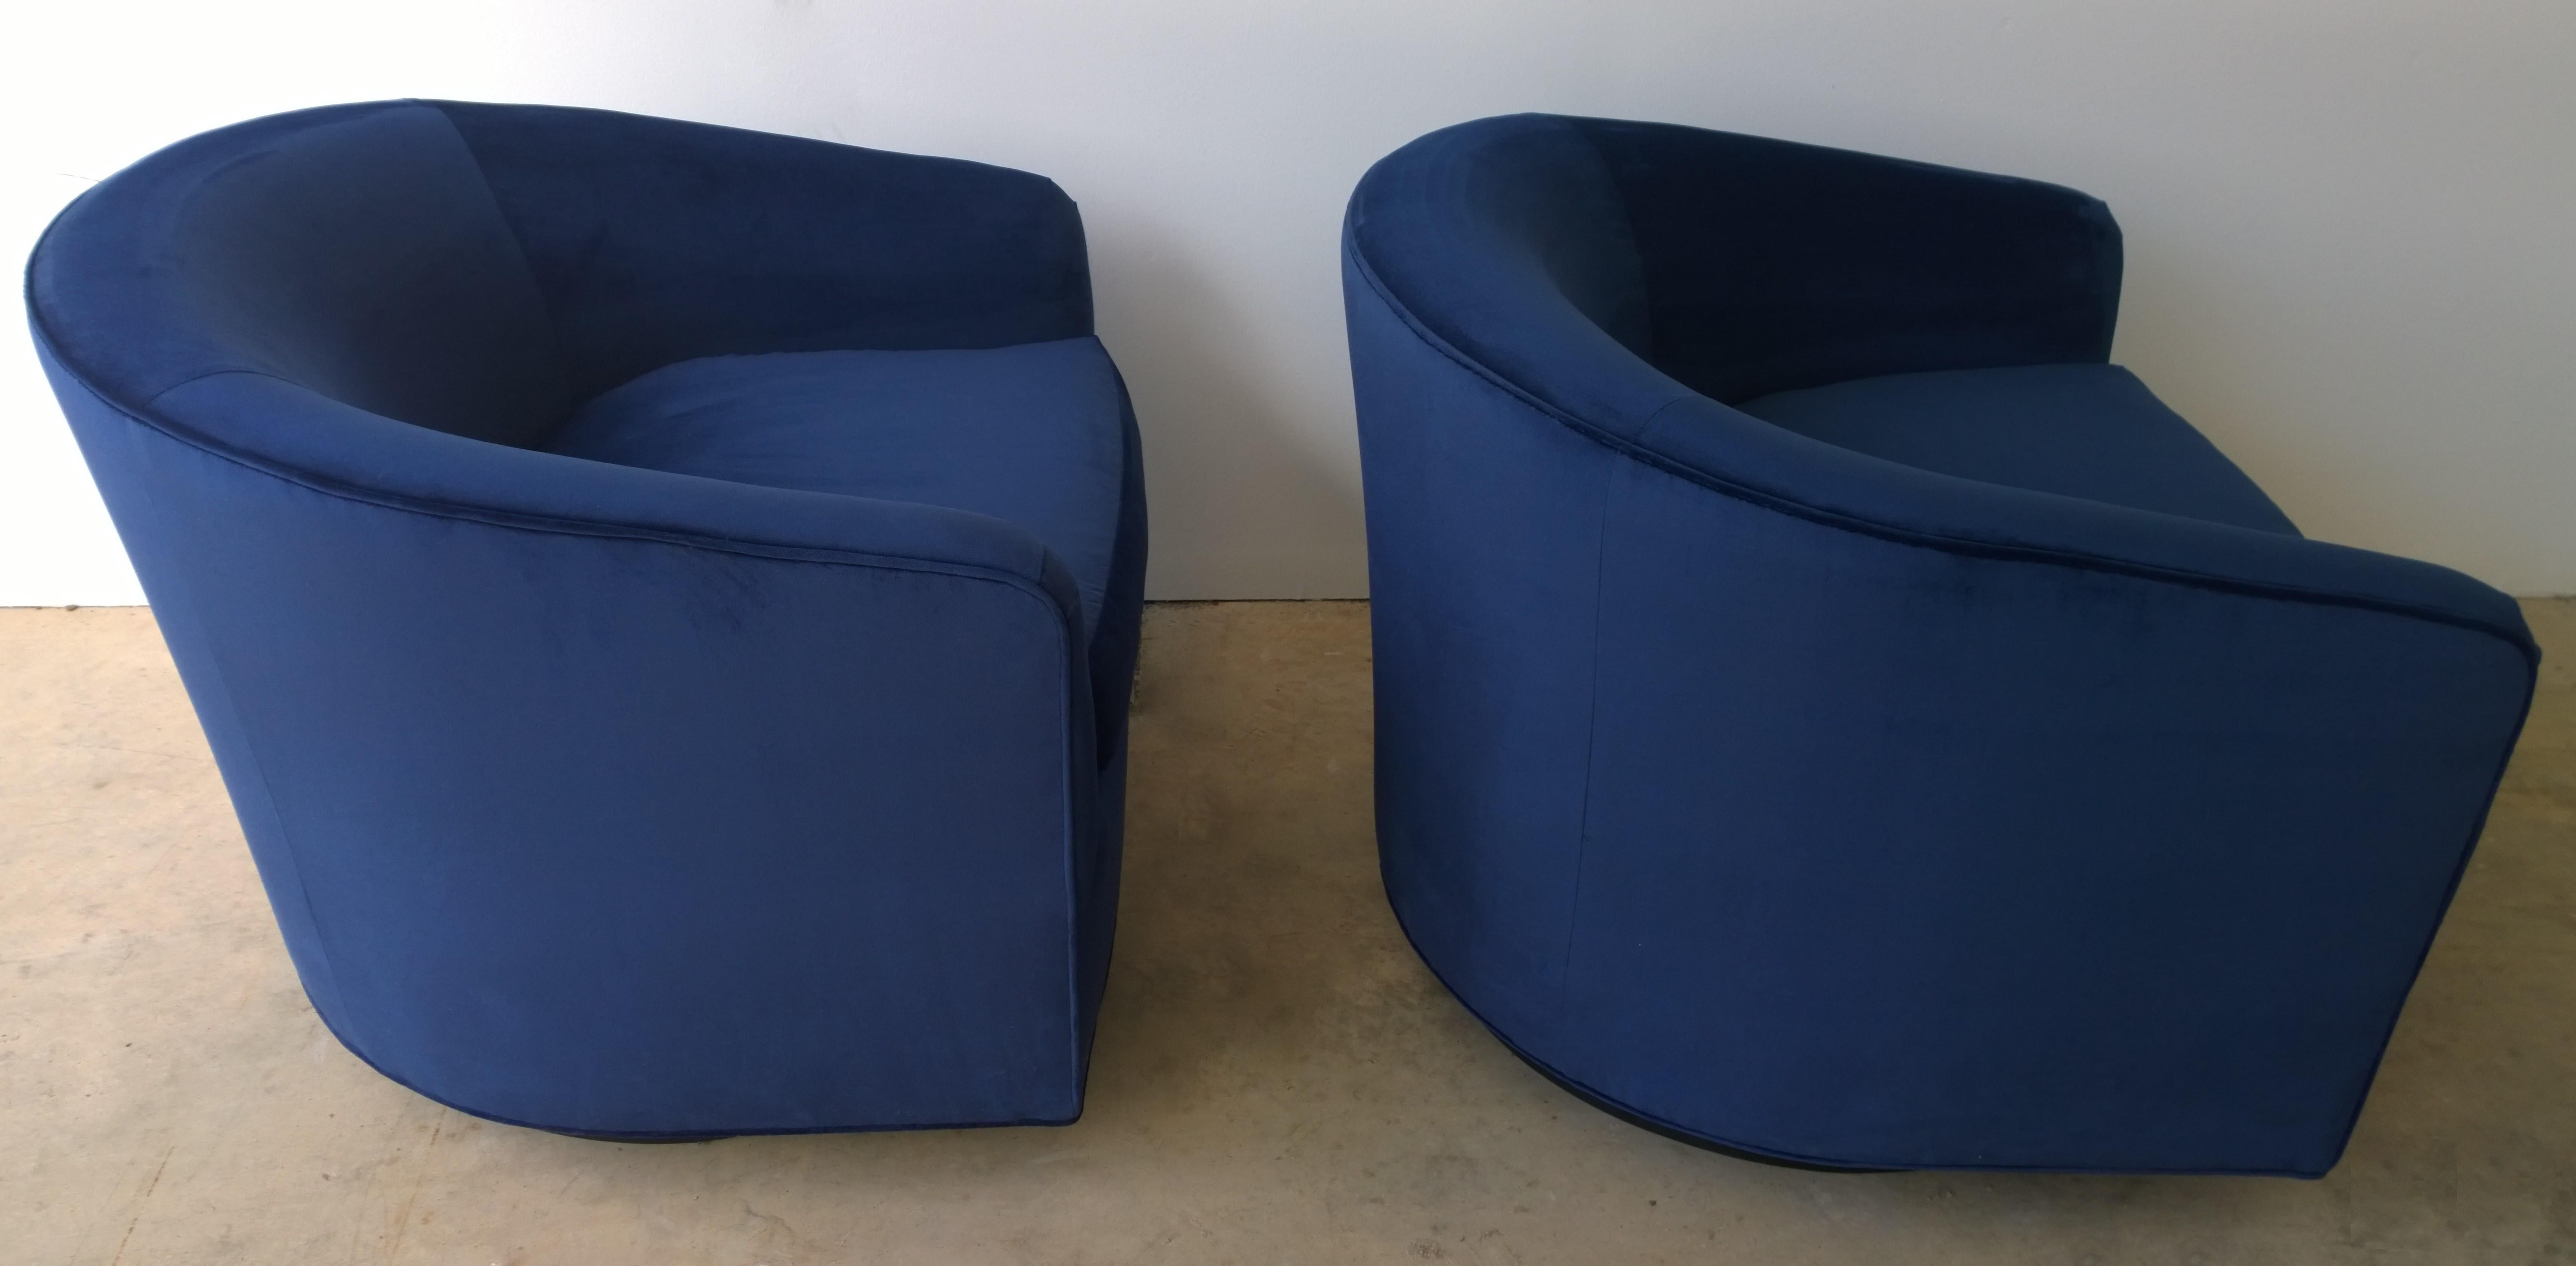 Pair of Baughman Style New Blue Cotton Velvet Swivel Chairs w/ Ebony Wood Bases For Sale 6